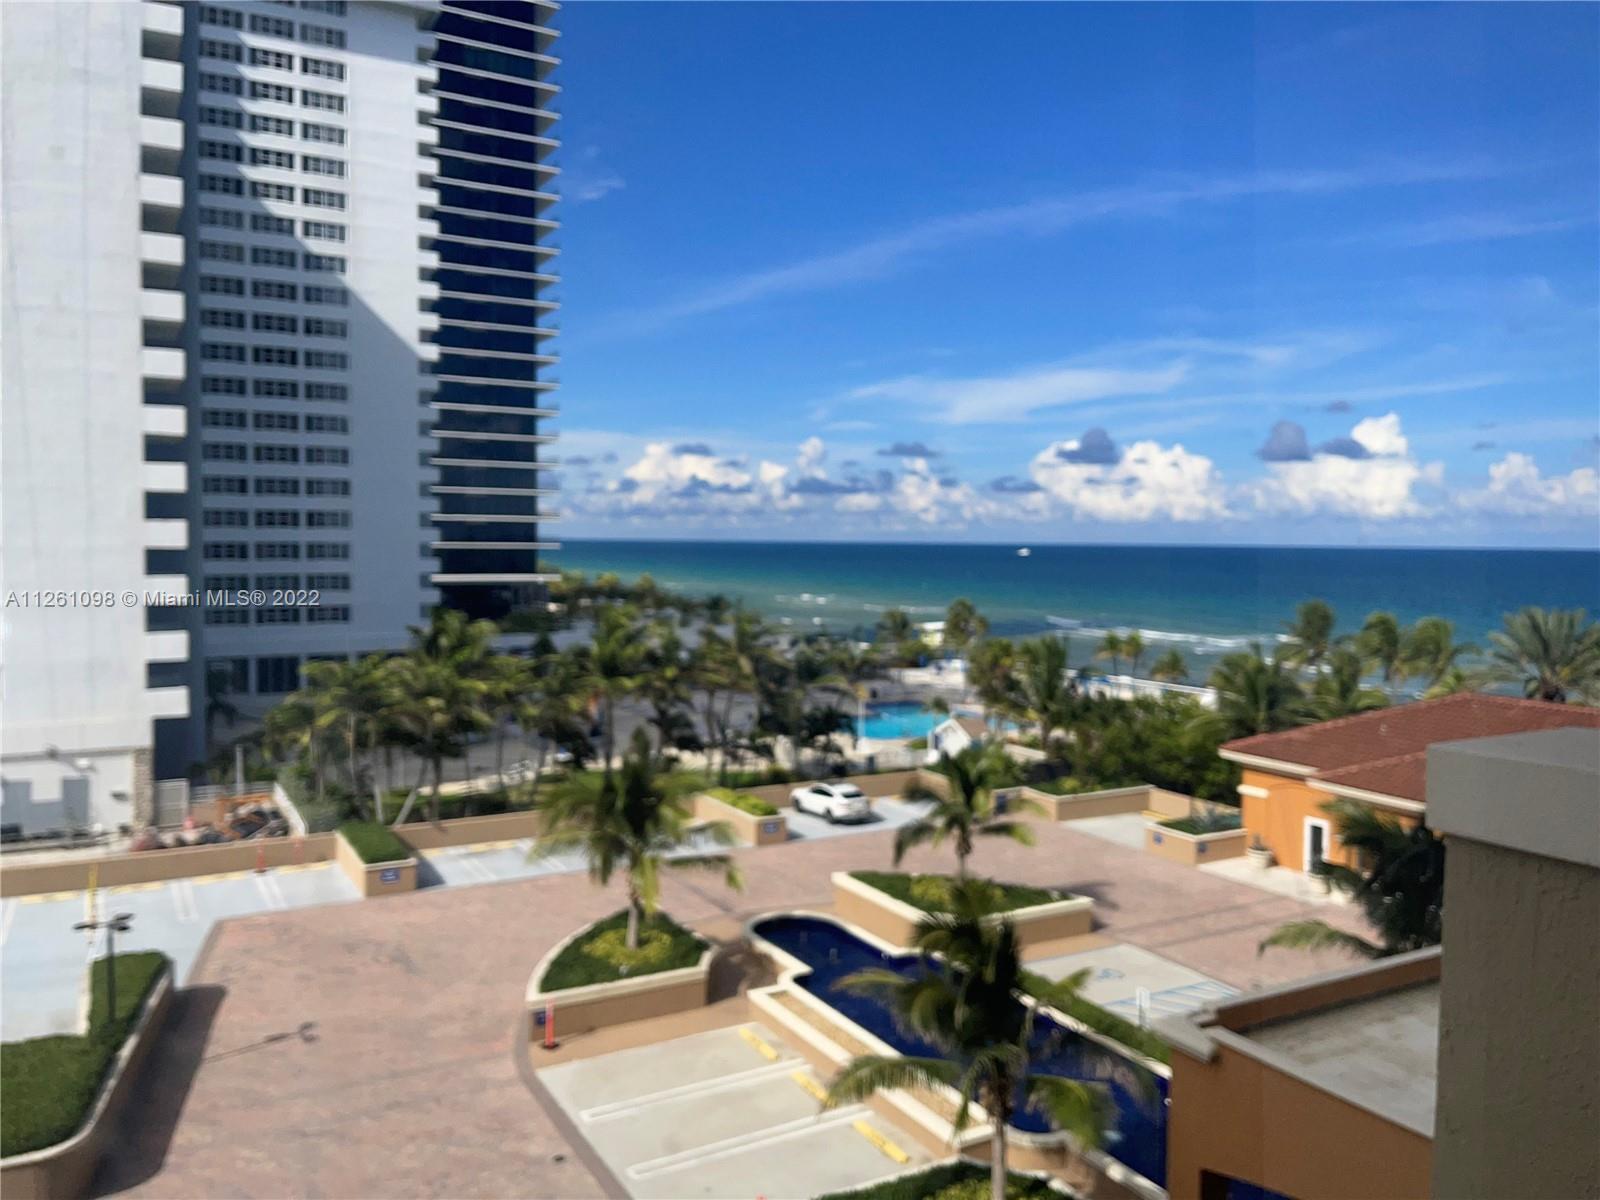 Wonderful oceanfront condominium easy to show 2/2, great opportunity for investors, can be rented se